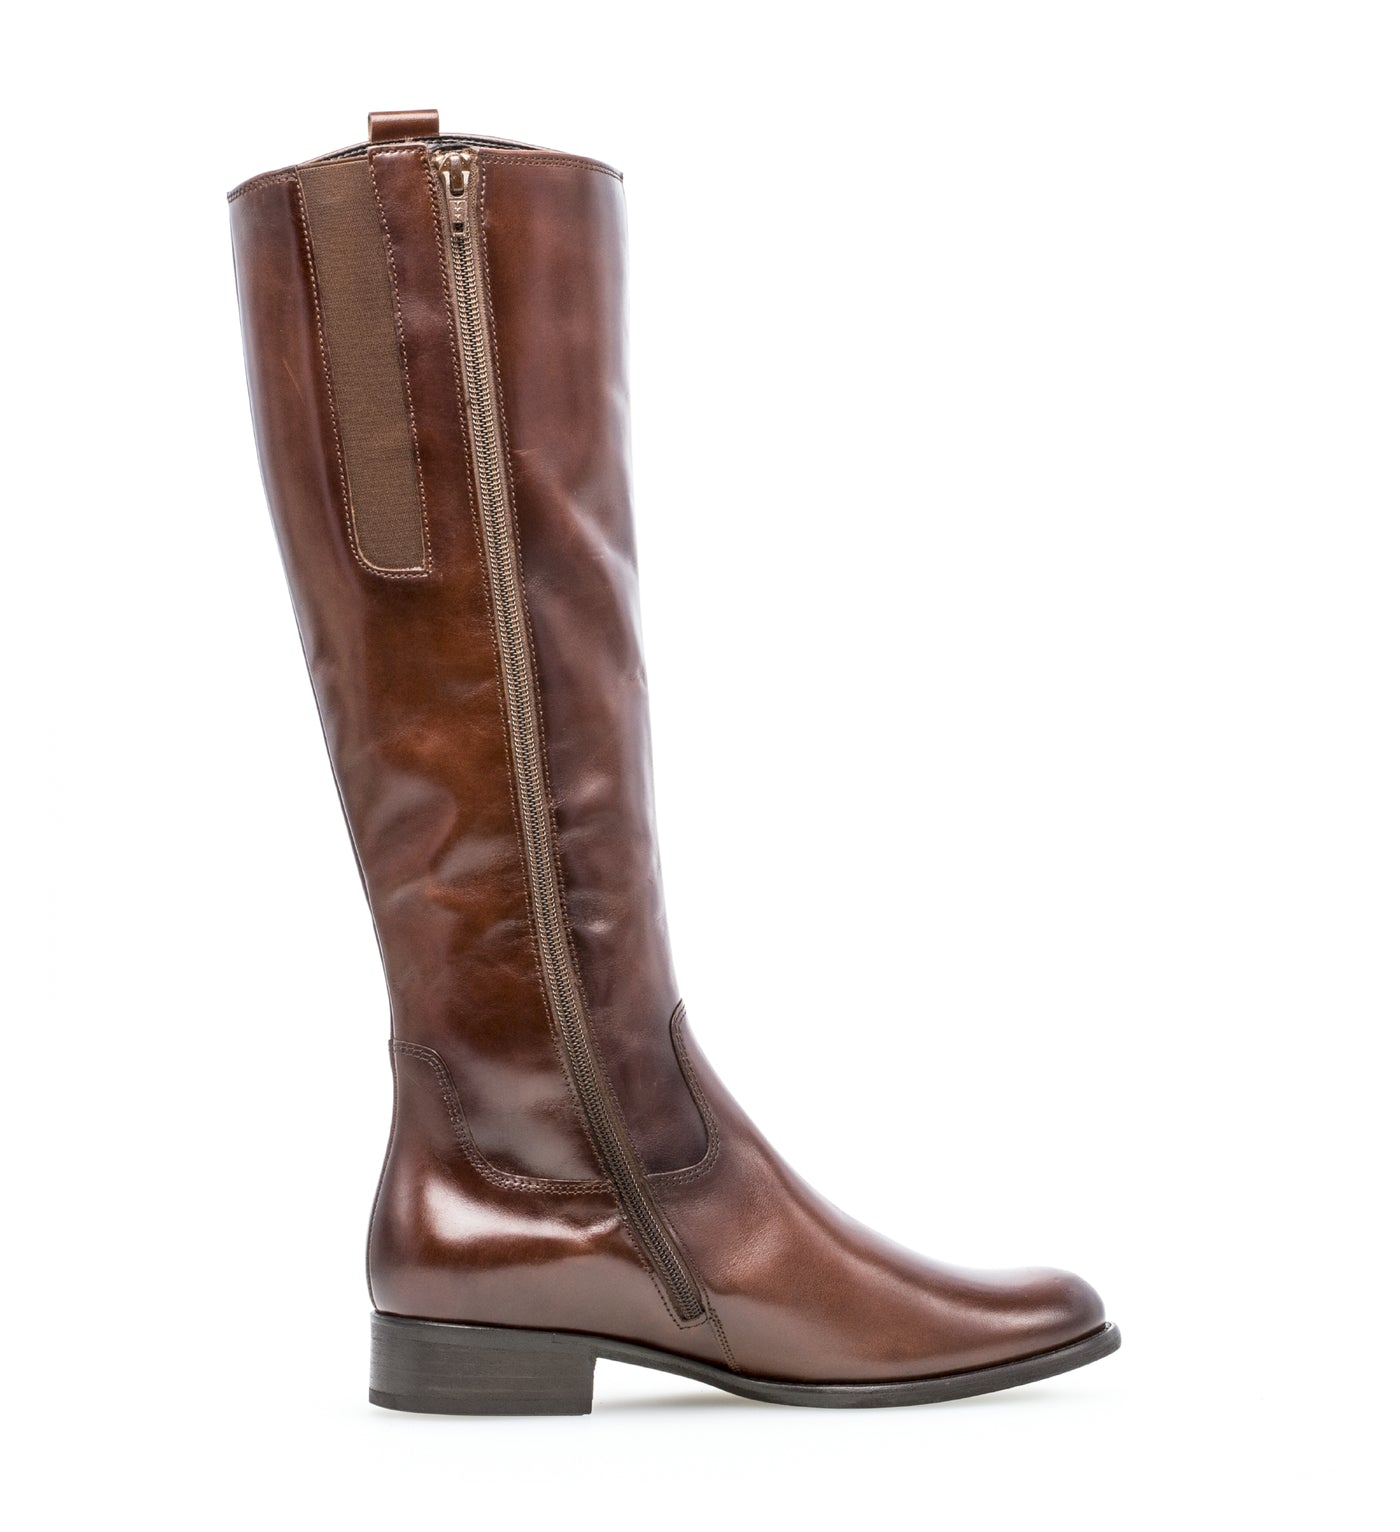 GABOR 71.648.24 - LOW HEEL LONG BOOT - BROWN LEATHER